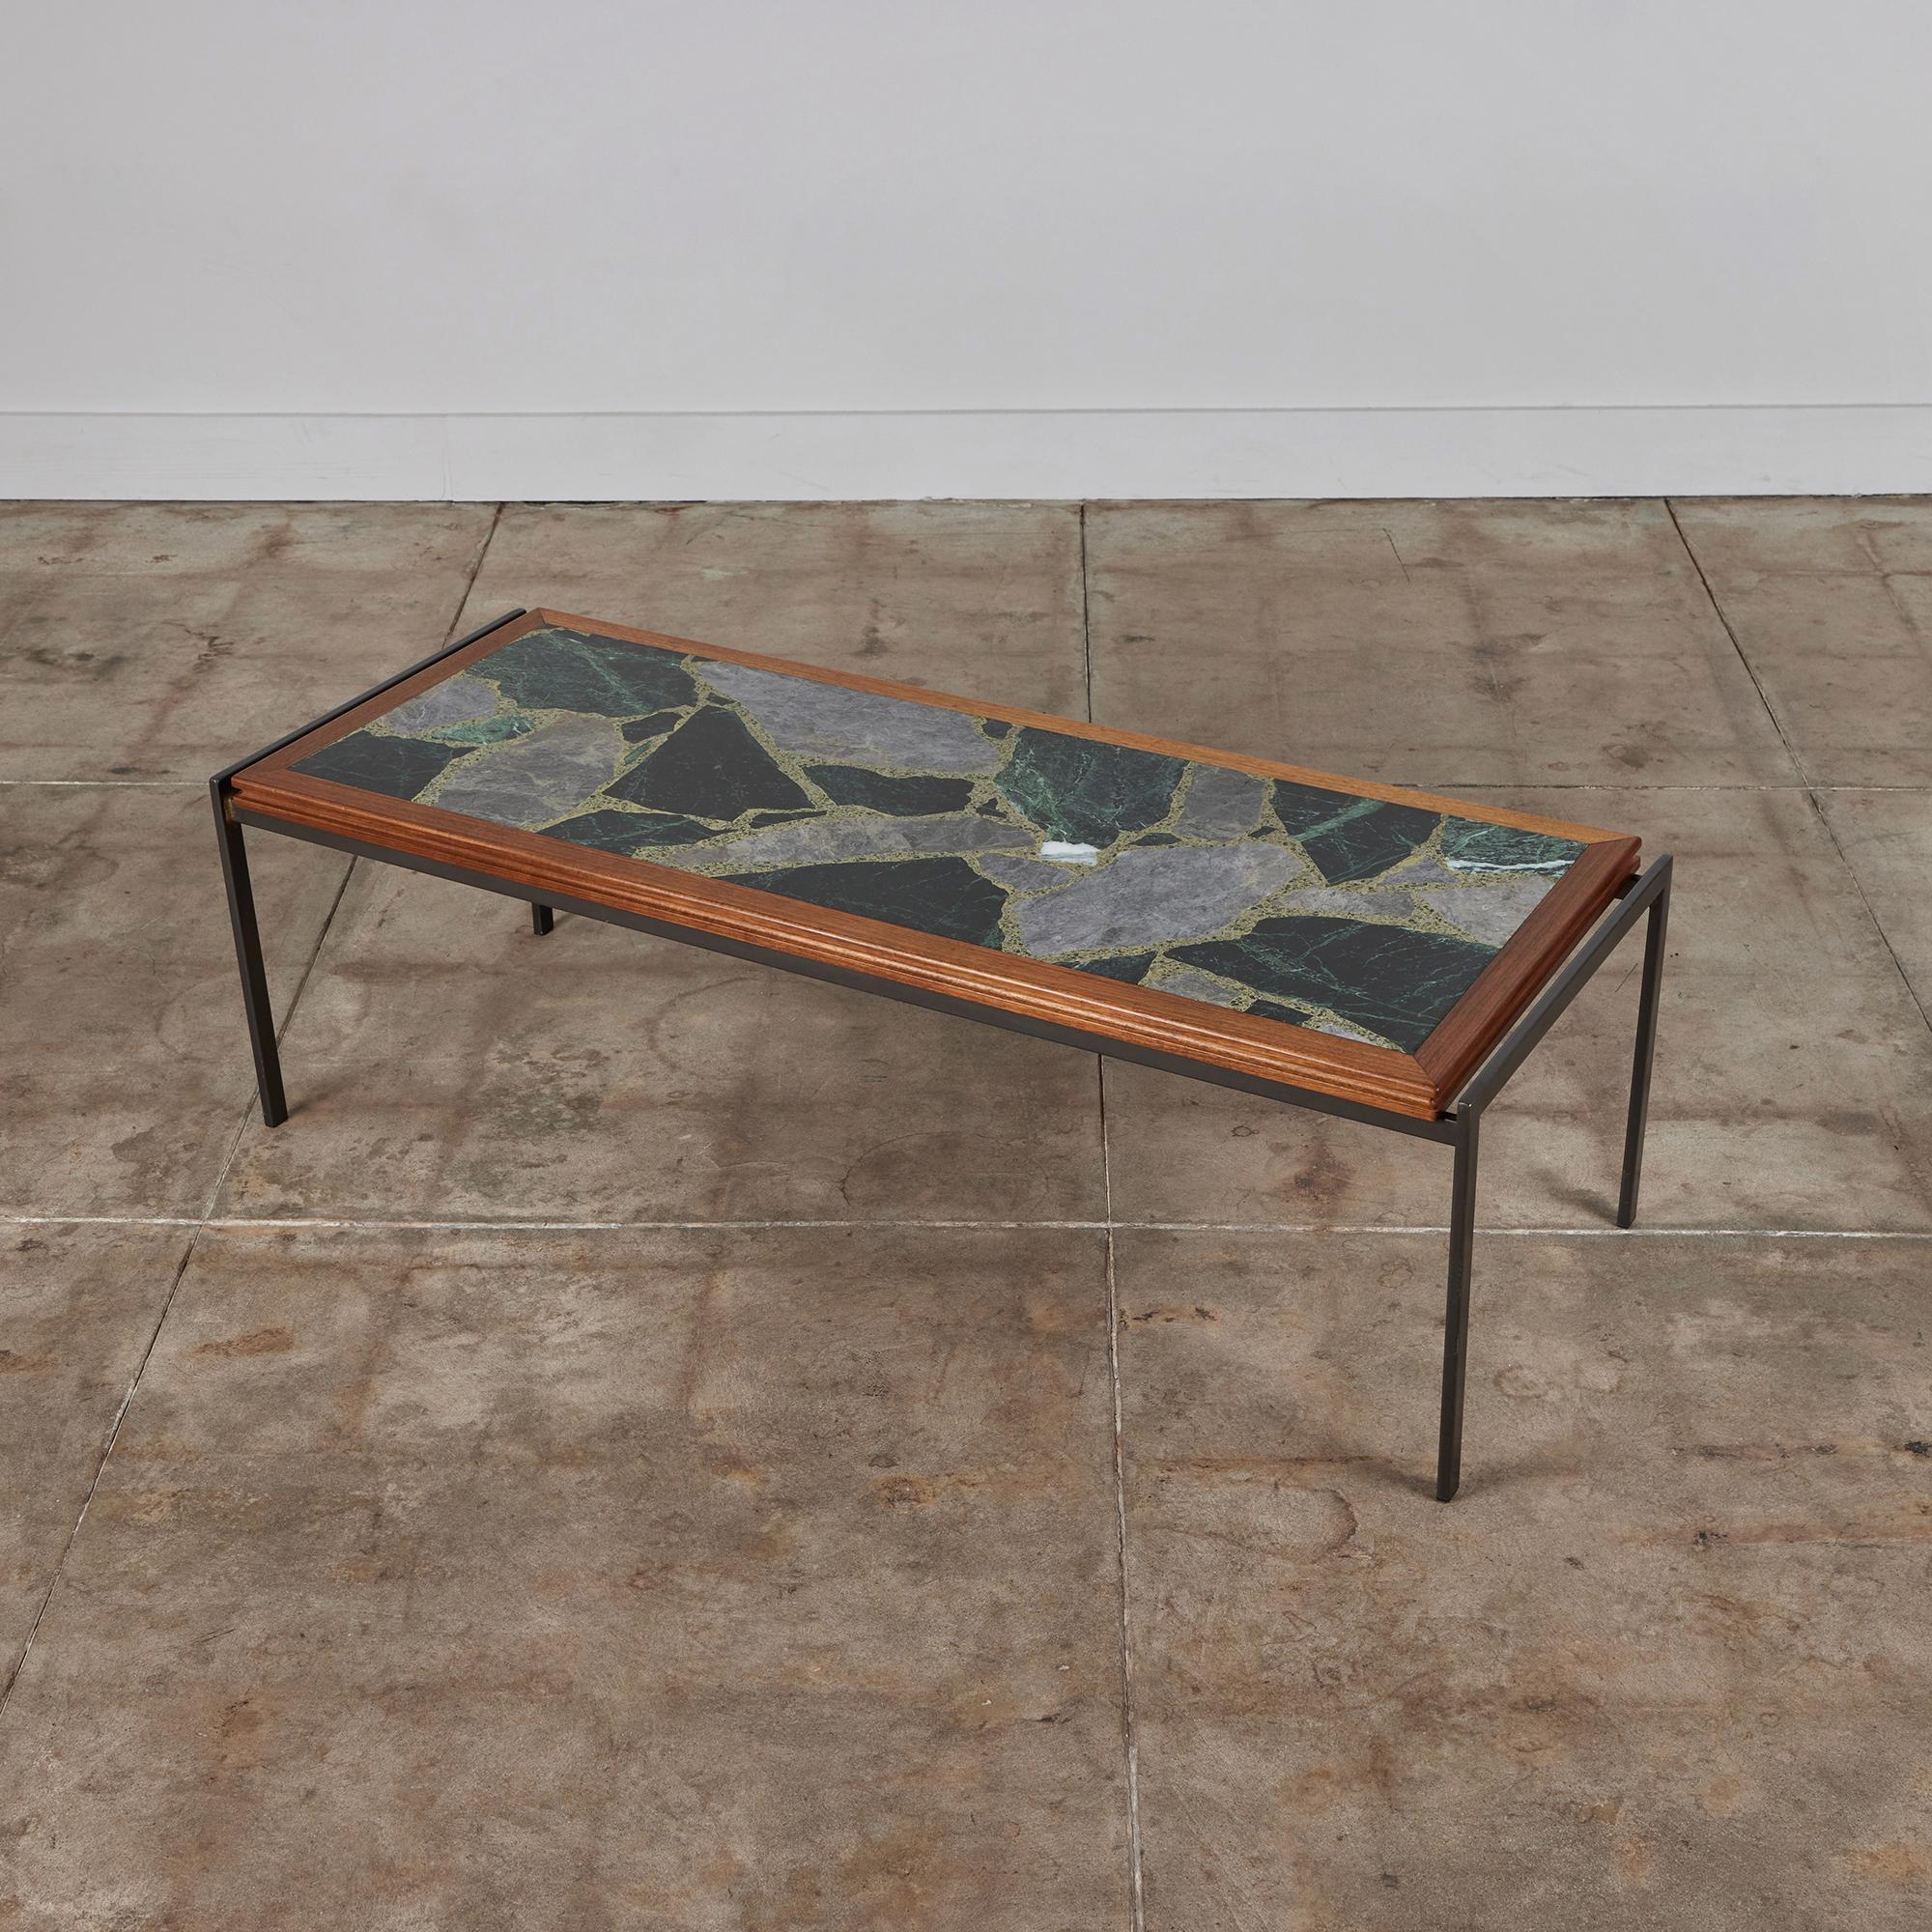 Marble top coffee table by Framac, c.1960s, Australia. The rectangular table features a blackwood frame and marble terrazzo stone top in varying green, gray and  cream tones. The table top is supported by an industrial steel base.

Dimensions
53”